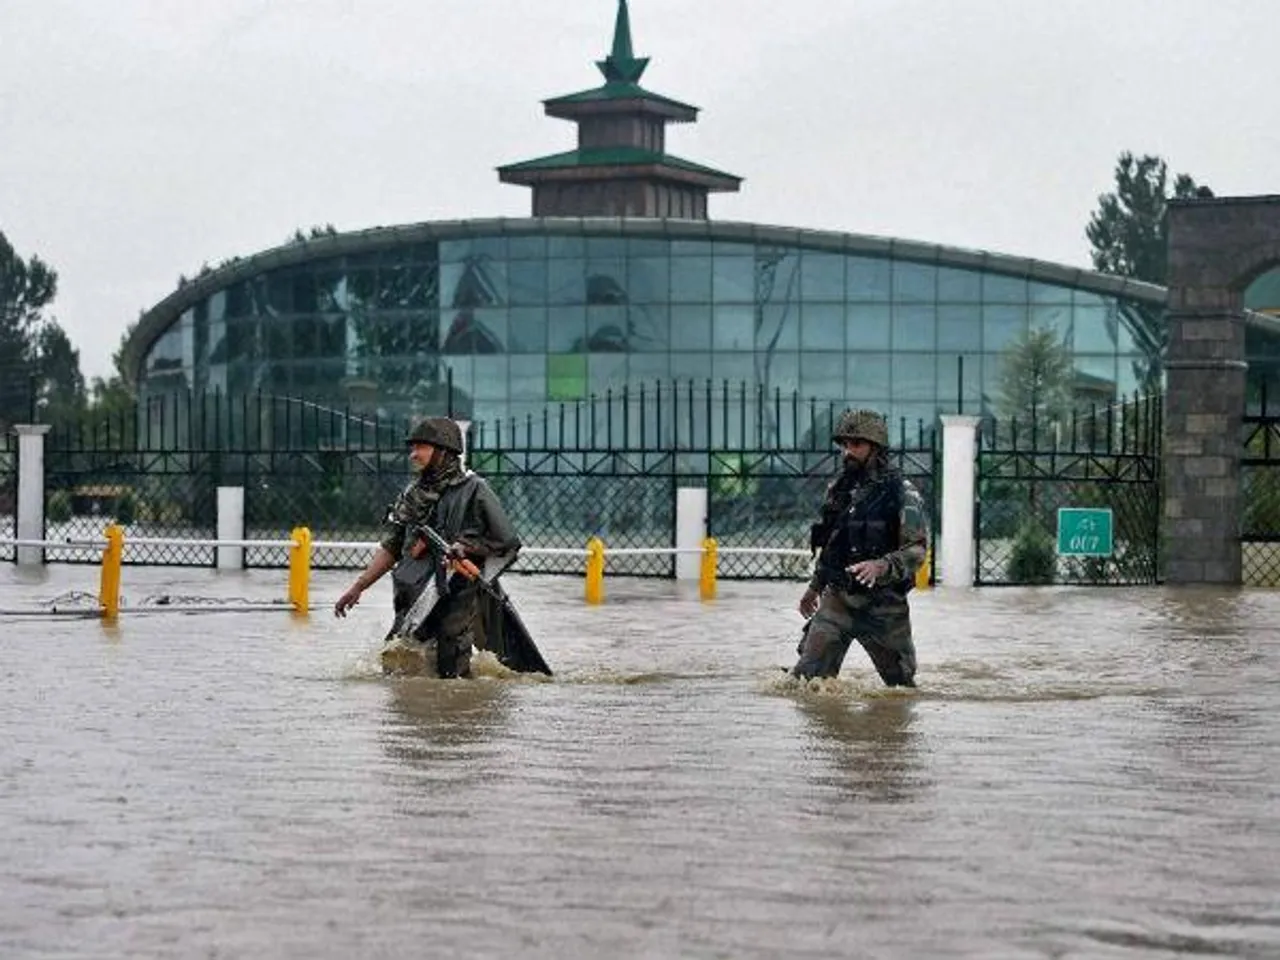 Trade & Industry badly effected by J&K Floods